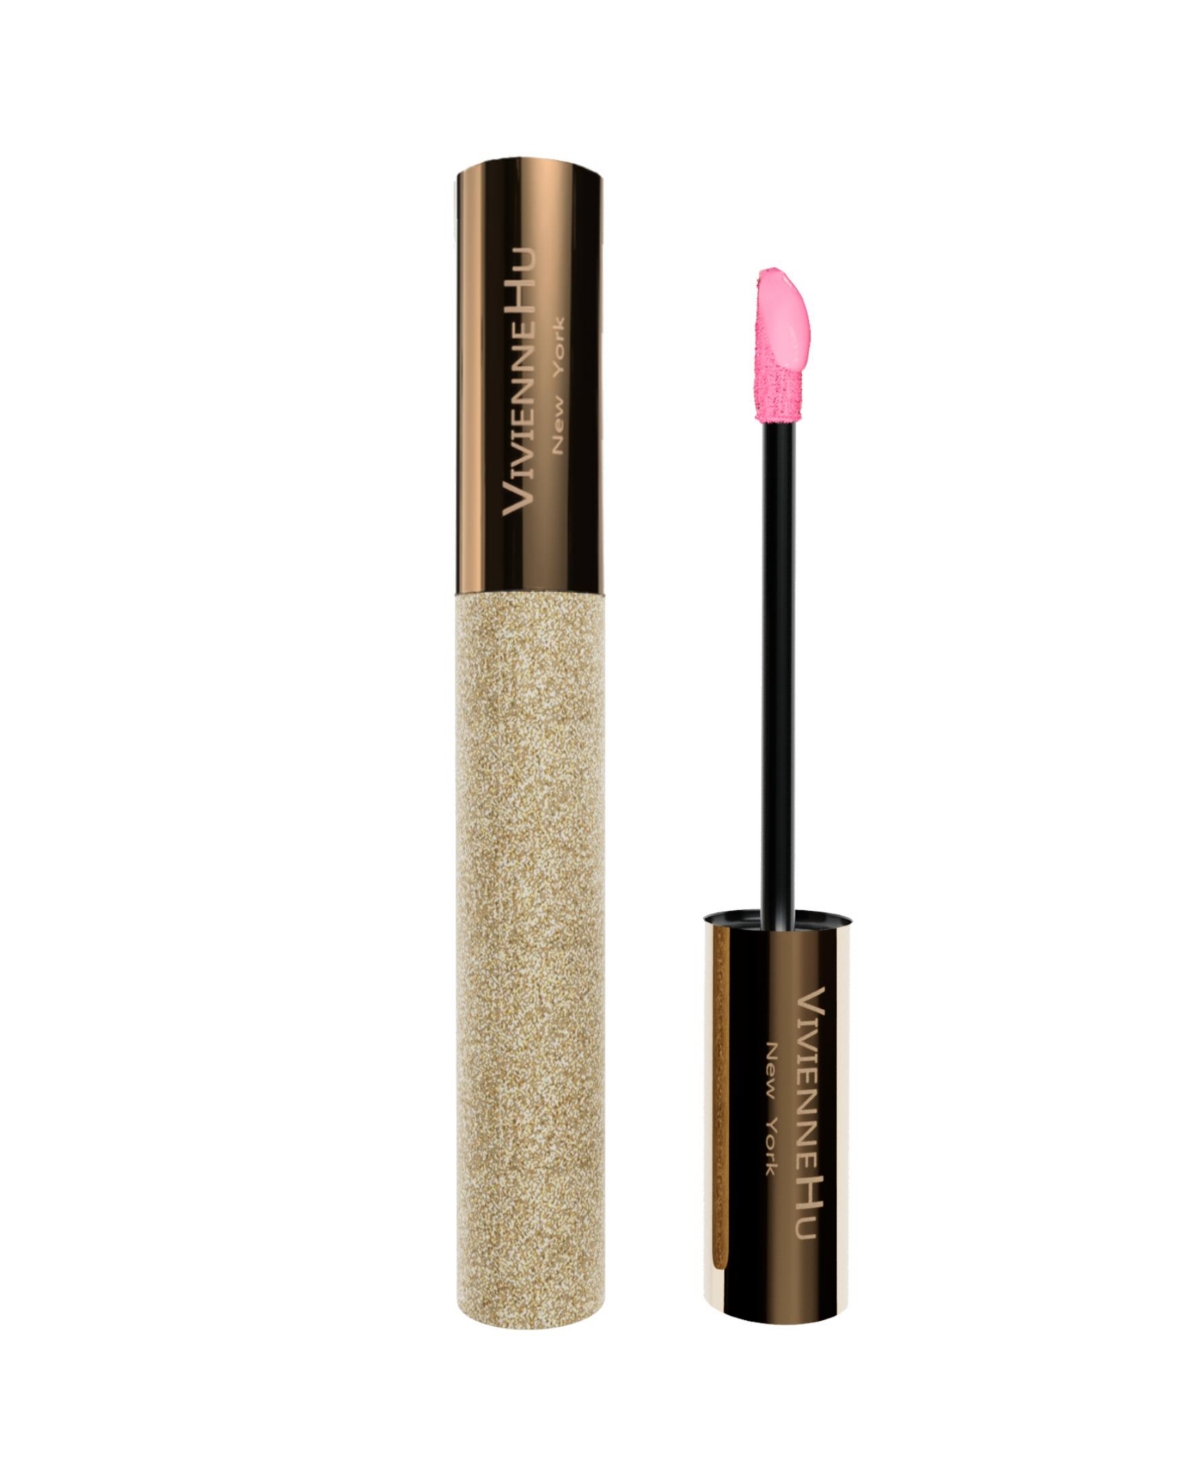 Vivienne Hu Goldsand Long-term Hydration Effect Lip Plumping Gloss – With Hyaluronic Acid, 0.27 Oz. In Confetti Pink